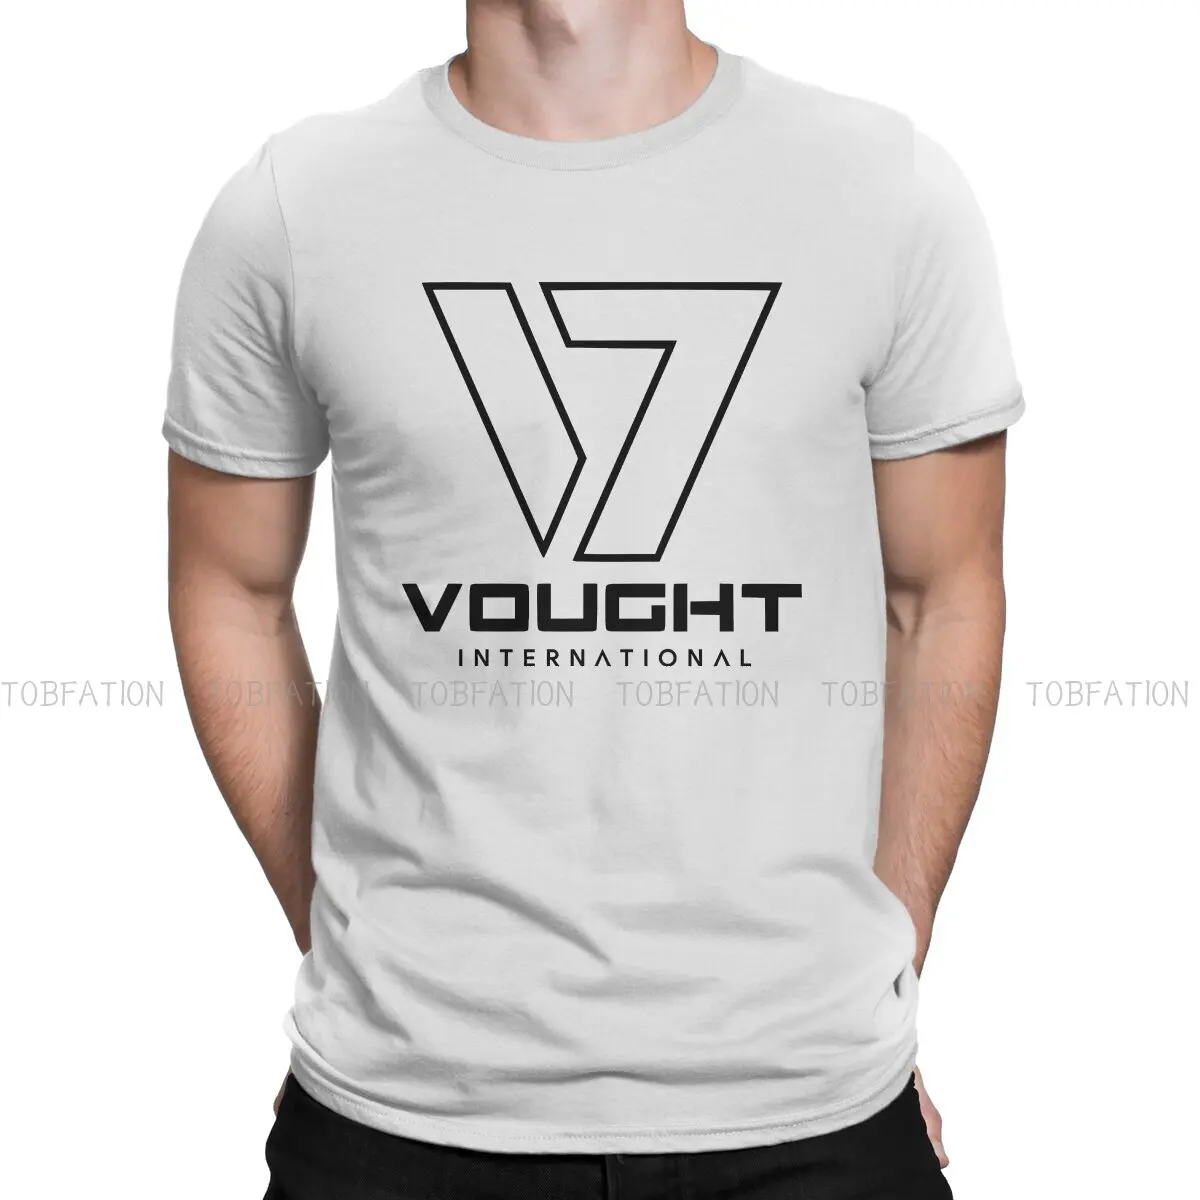 Vought International Classic  Newest TShirts The Boys Billy TV Show Male Graphic Fabric Streetwear T Shirt Round Neck Oversized